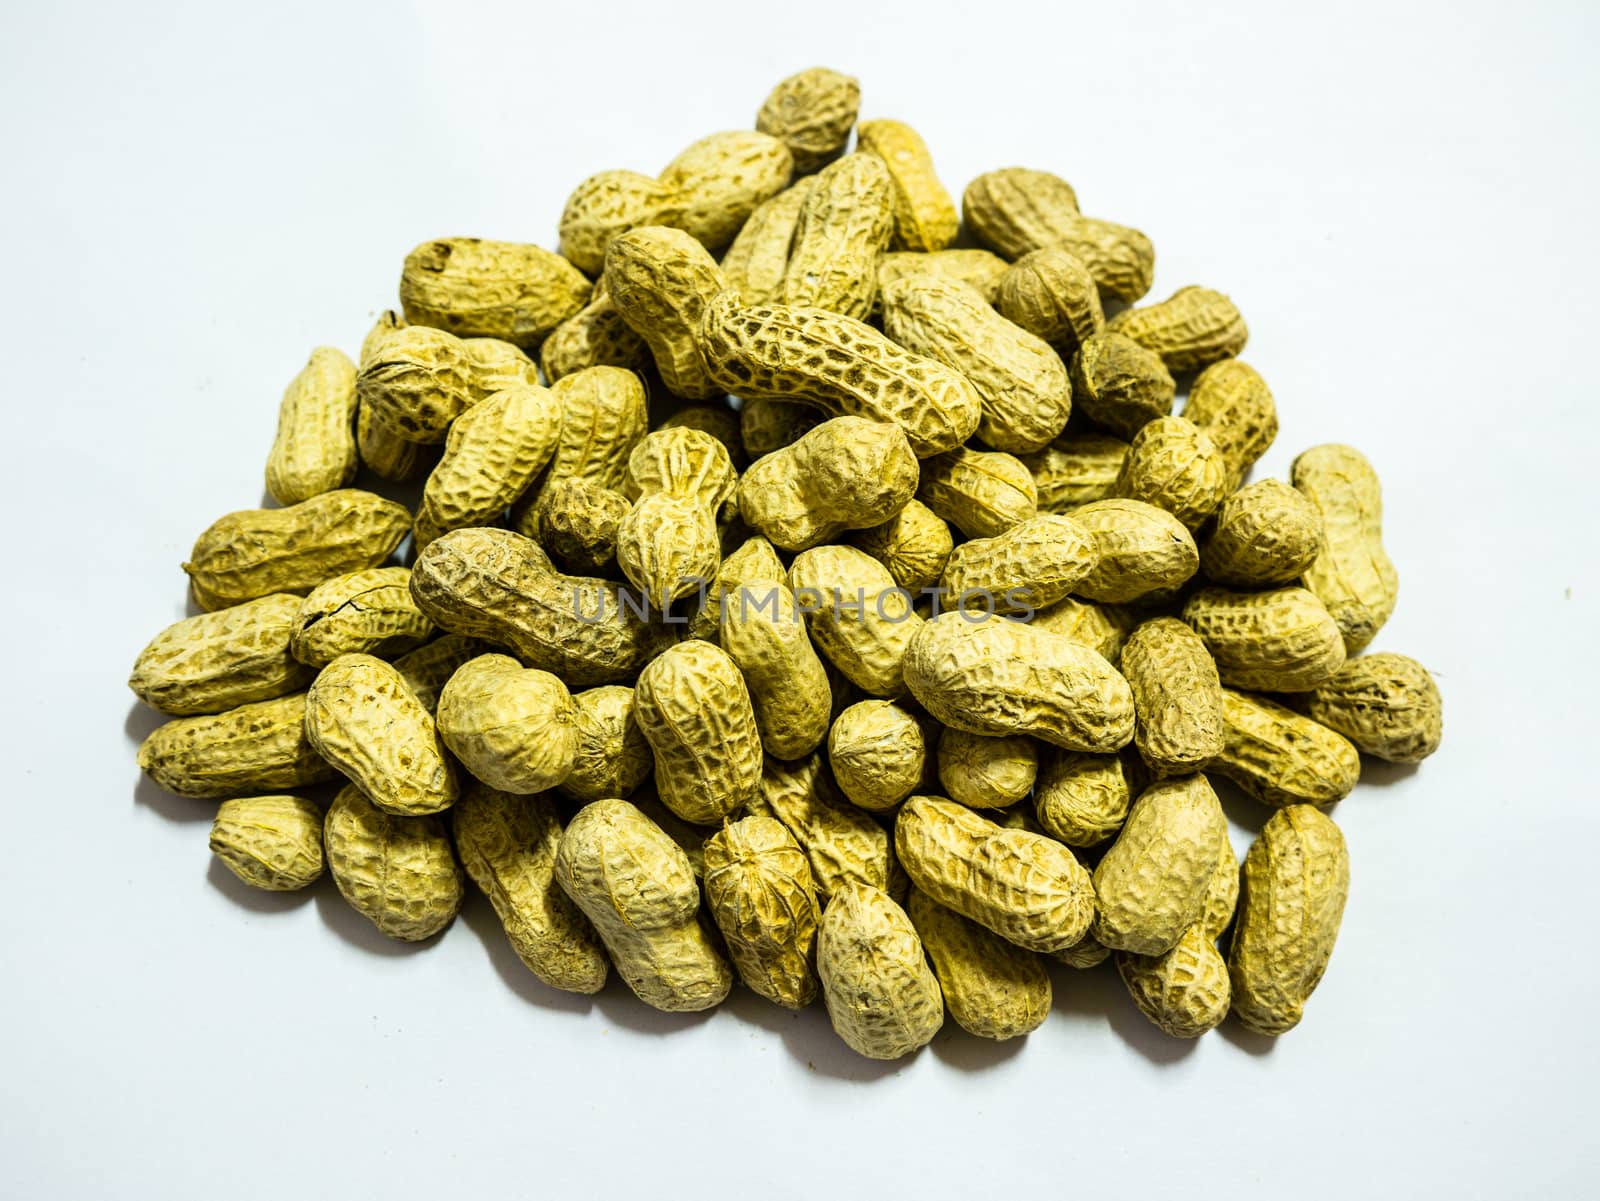 peanuts have many useful by golengstock